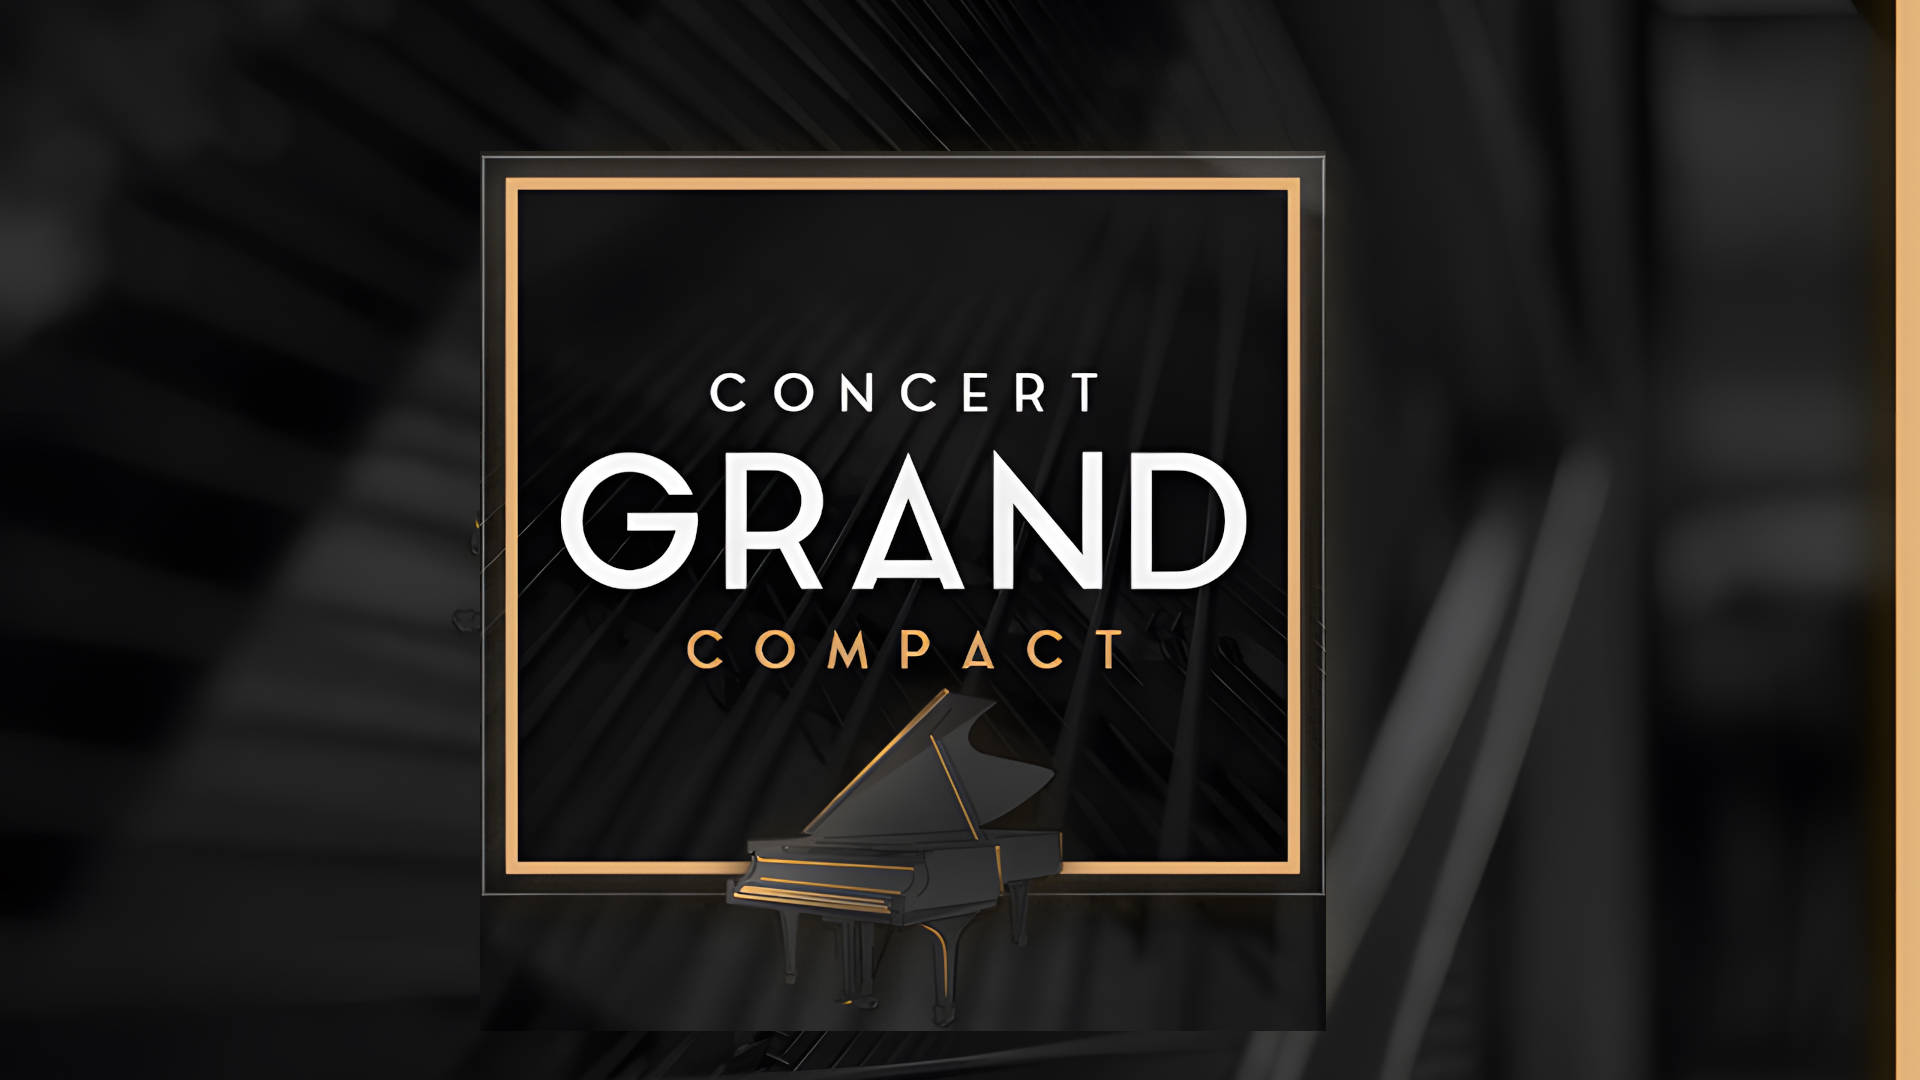 Concert Grand Compact